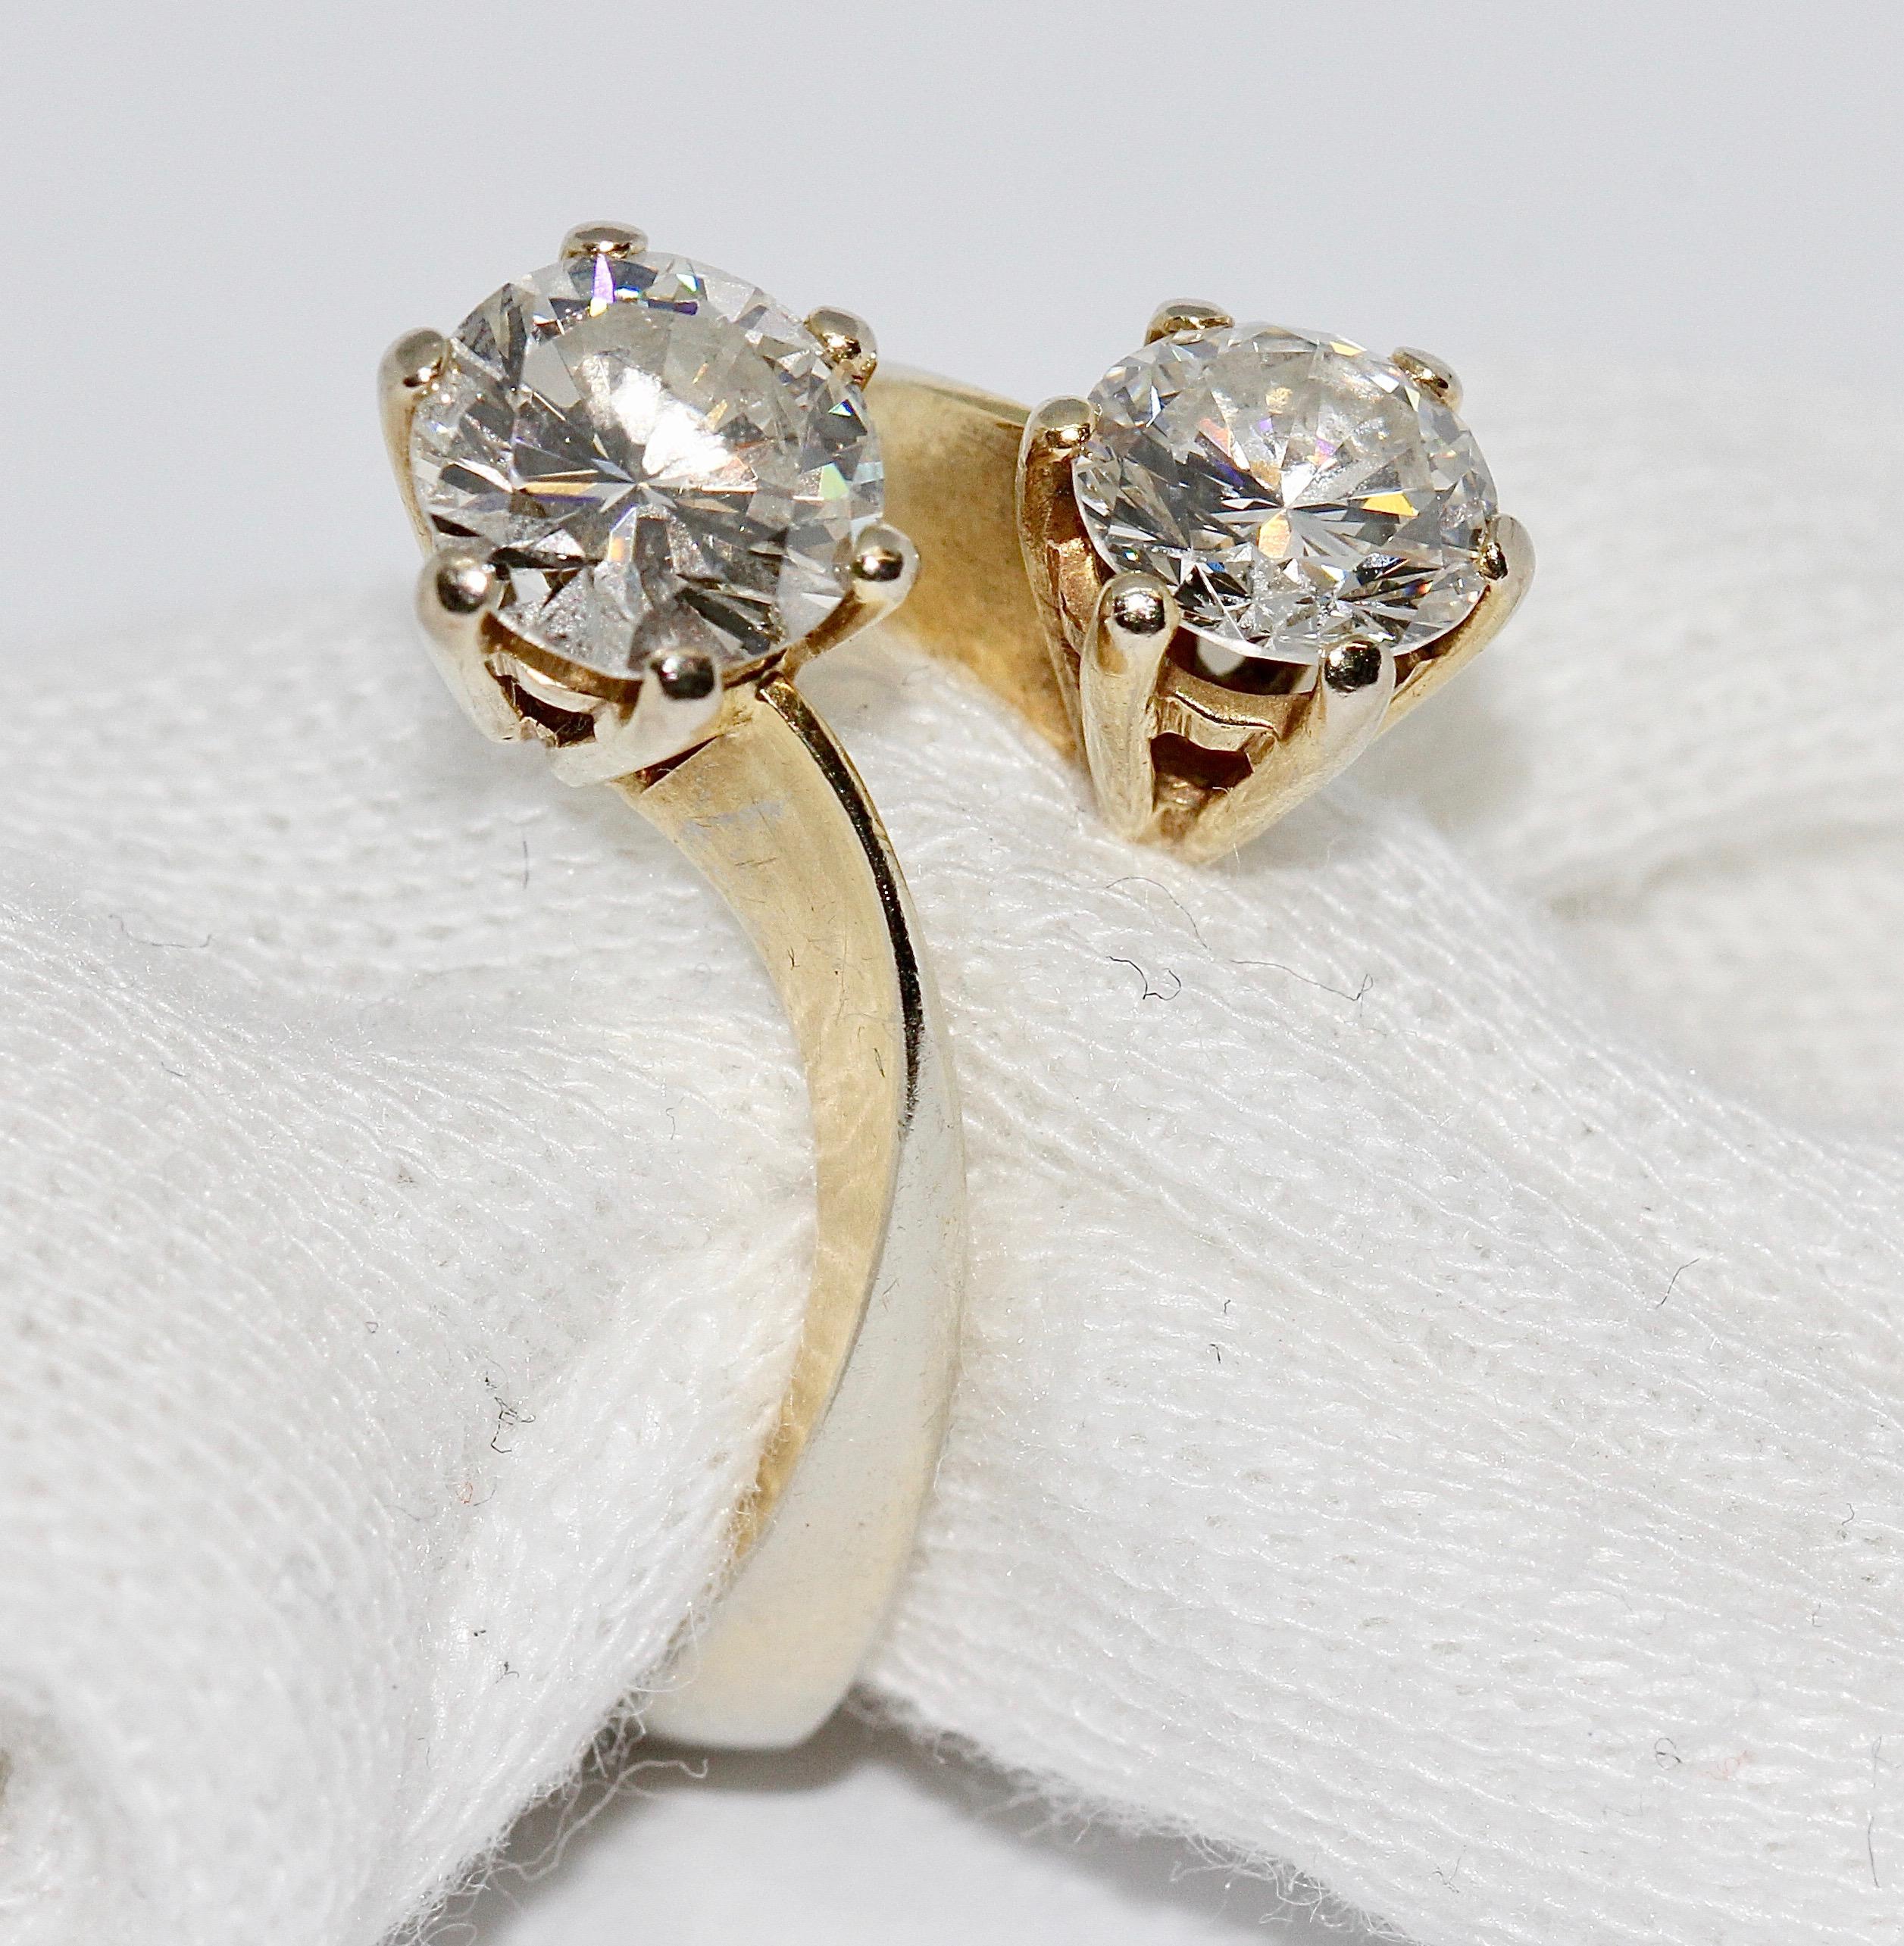 Luxurious Ladies Ring set with Two Large Diamond Solitaires. 18 Karat Gold.

Clarity VVS2, color Top Wesselton. Each approx. 0.95 ct. and 1.15 ct.

We can adjust the ring to any desired ring size.

Including certificate of authenticity.